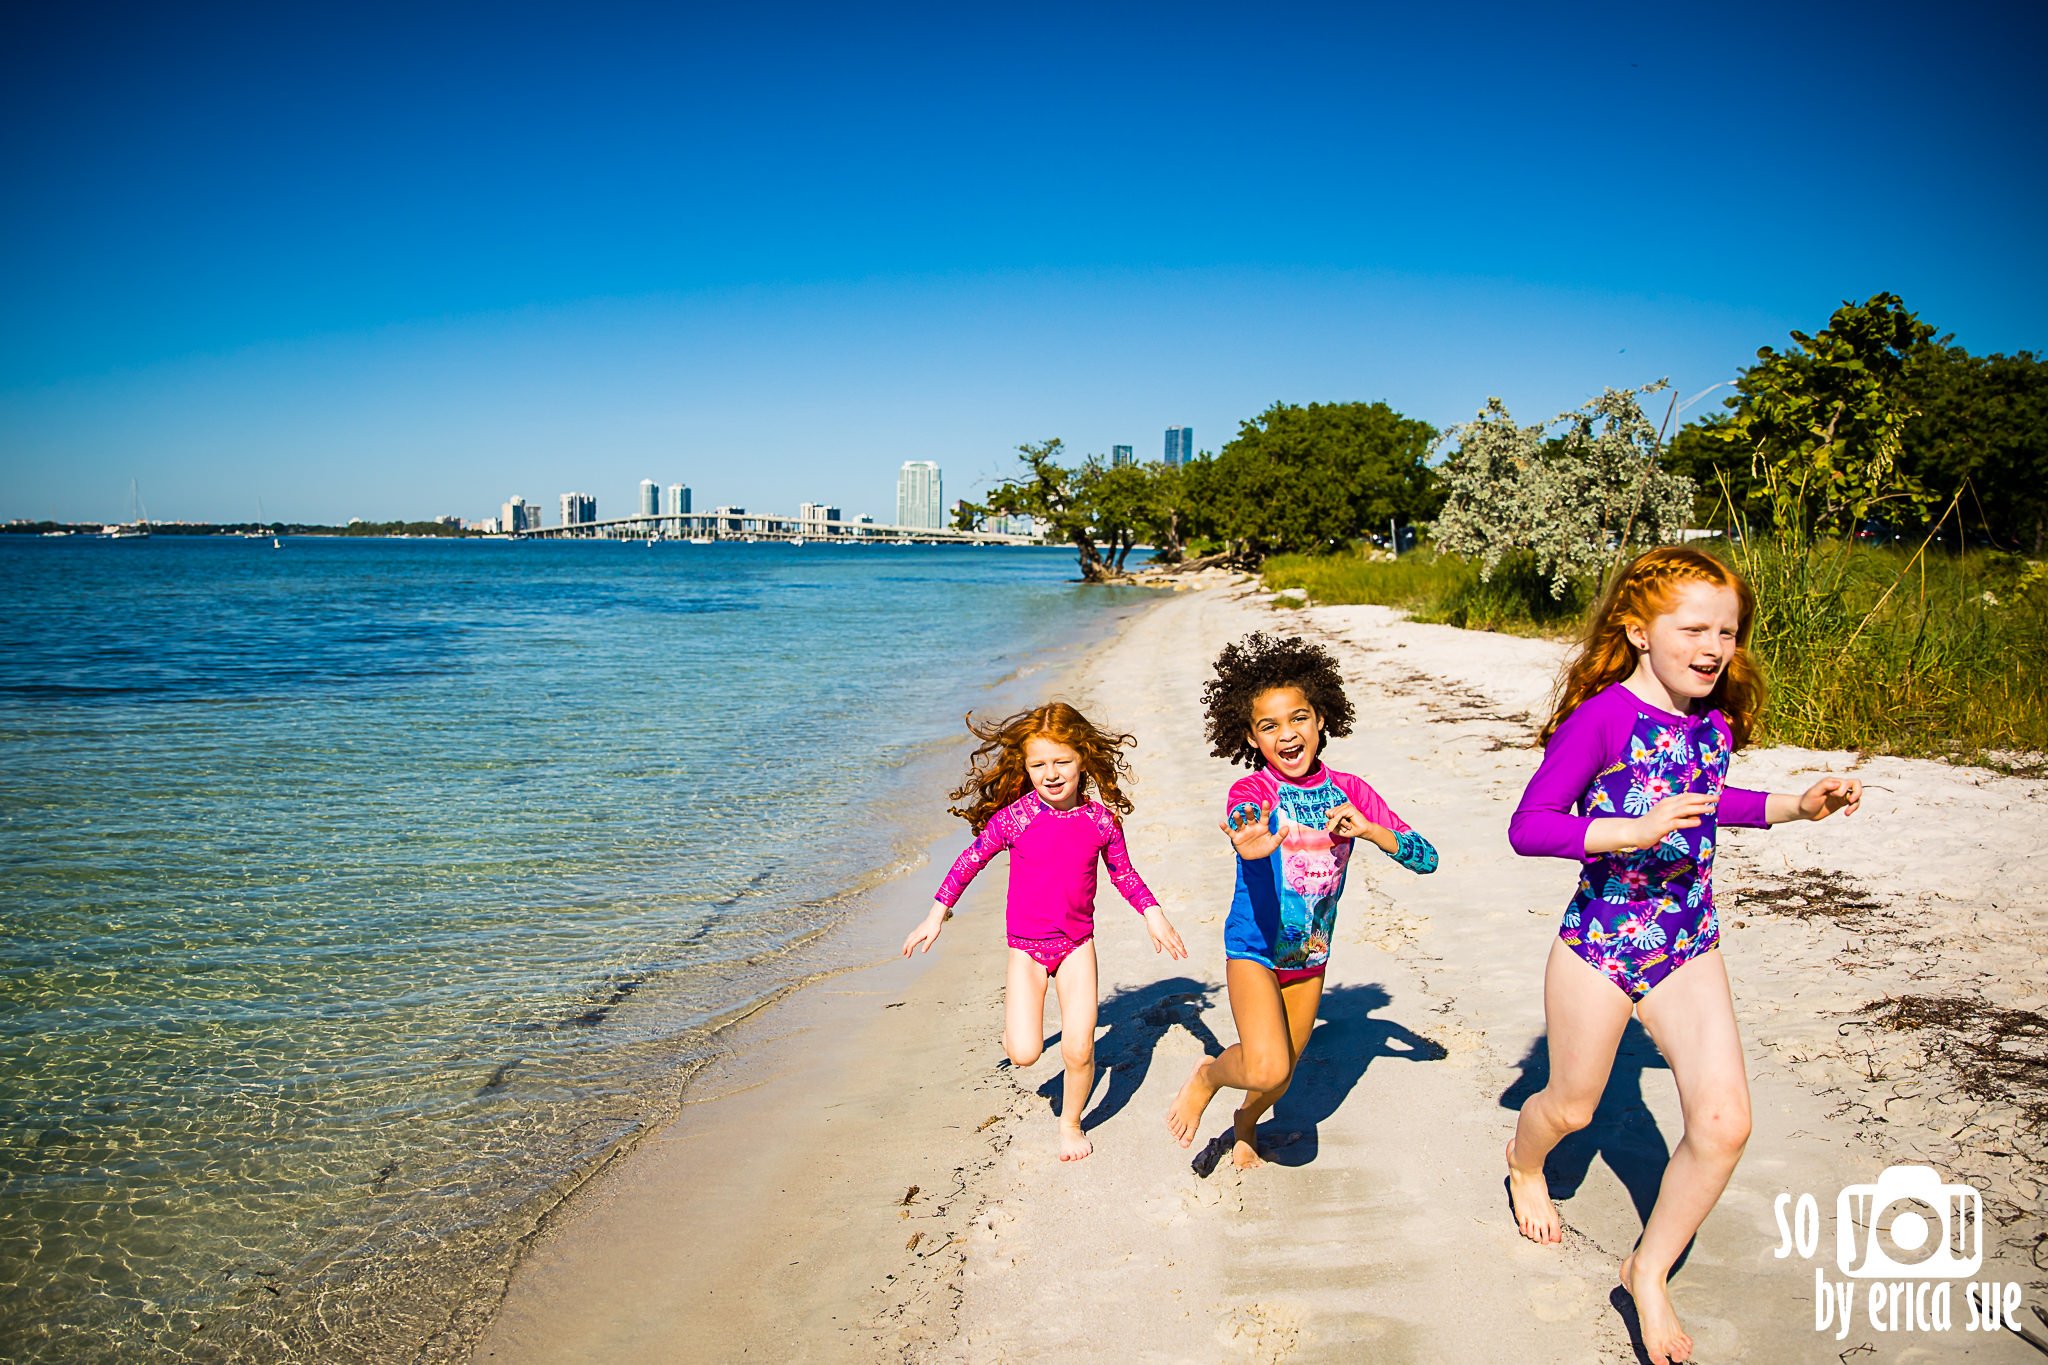 17-lifestyle-family-photographer-key-biscayne-miami-fl-so-you-by-erica-sue-silver-family-CD8A1277.jpg